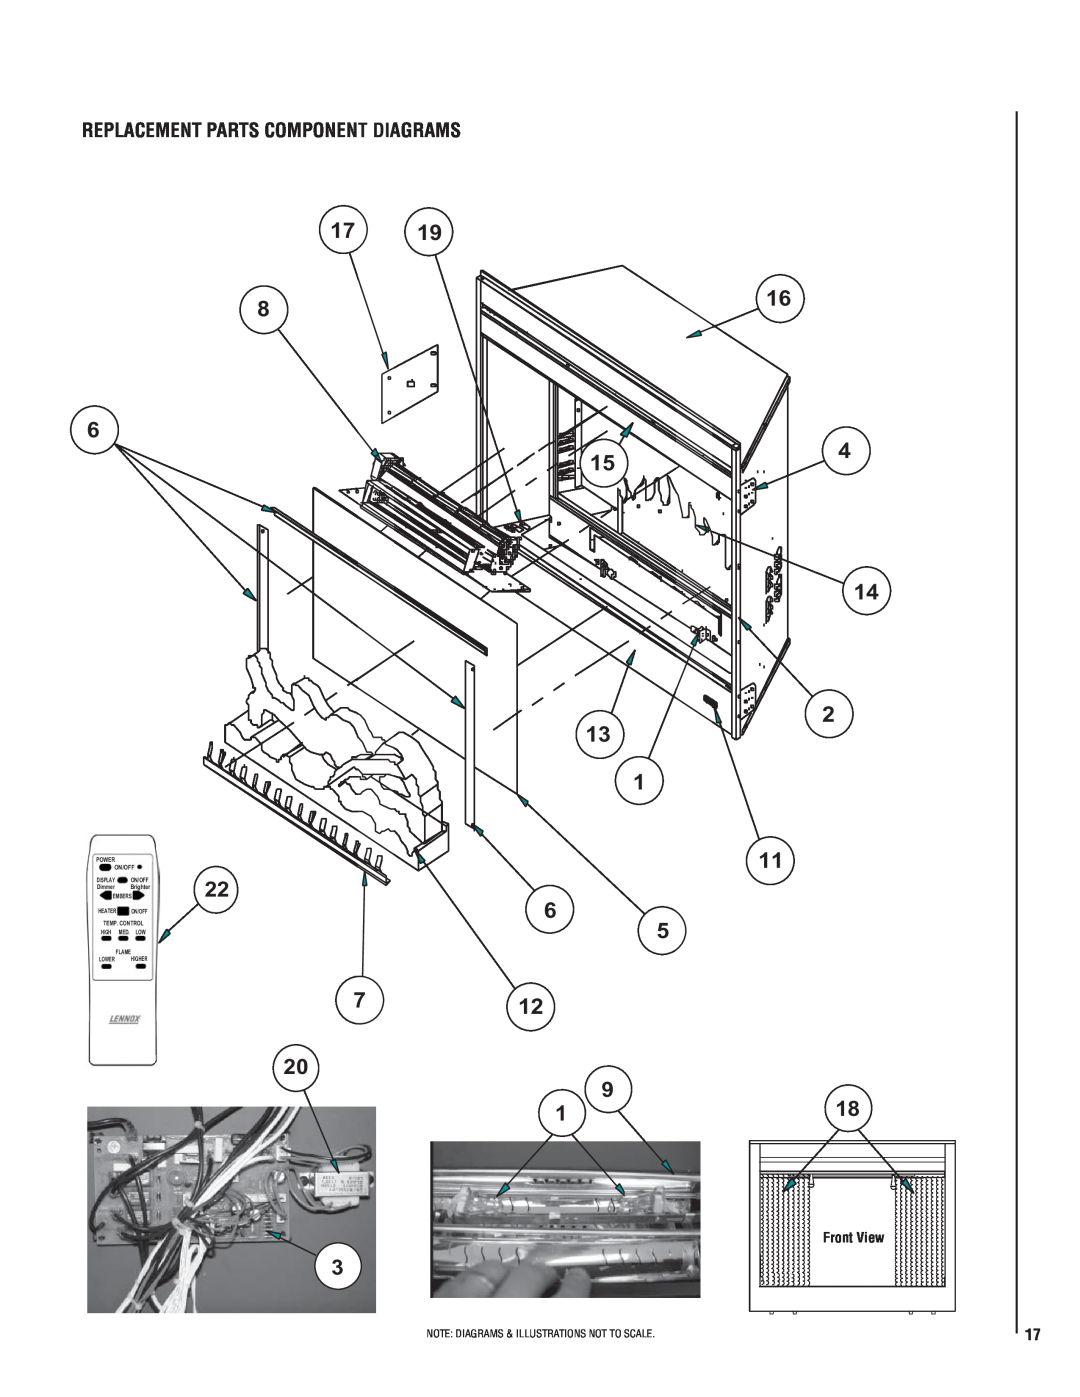 Lennox Hearth MPE-36R Replacement Parts Component Diagrams, 712, Note Diagrams & Illustrations Not To Scale, On/Off, High 